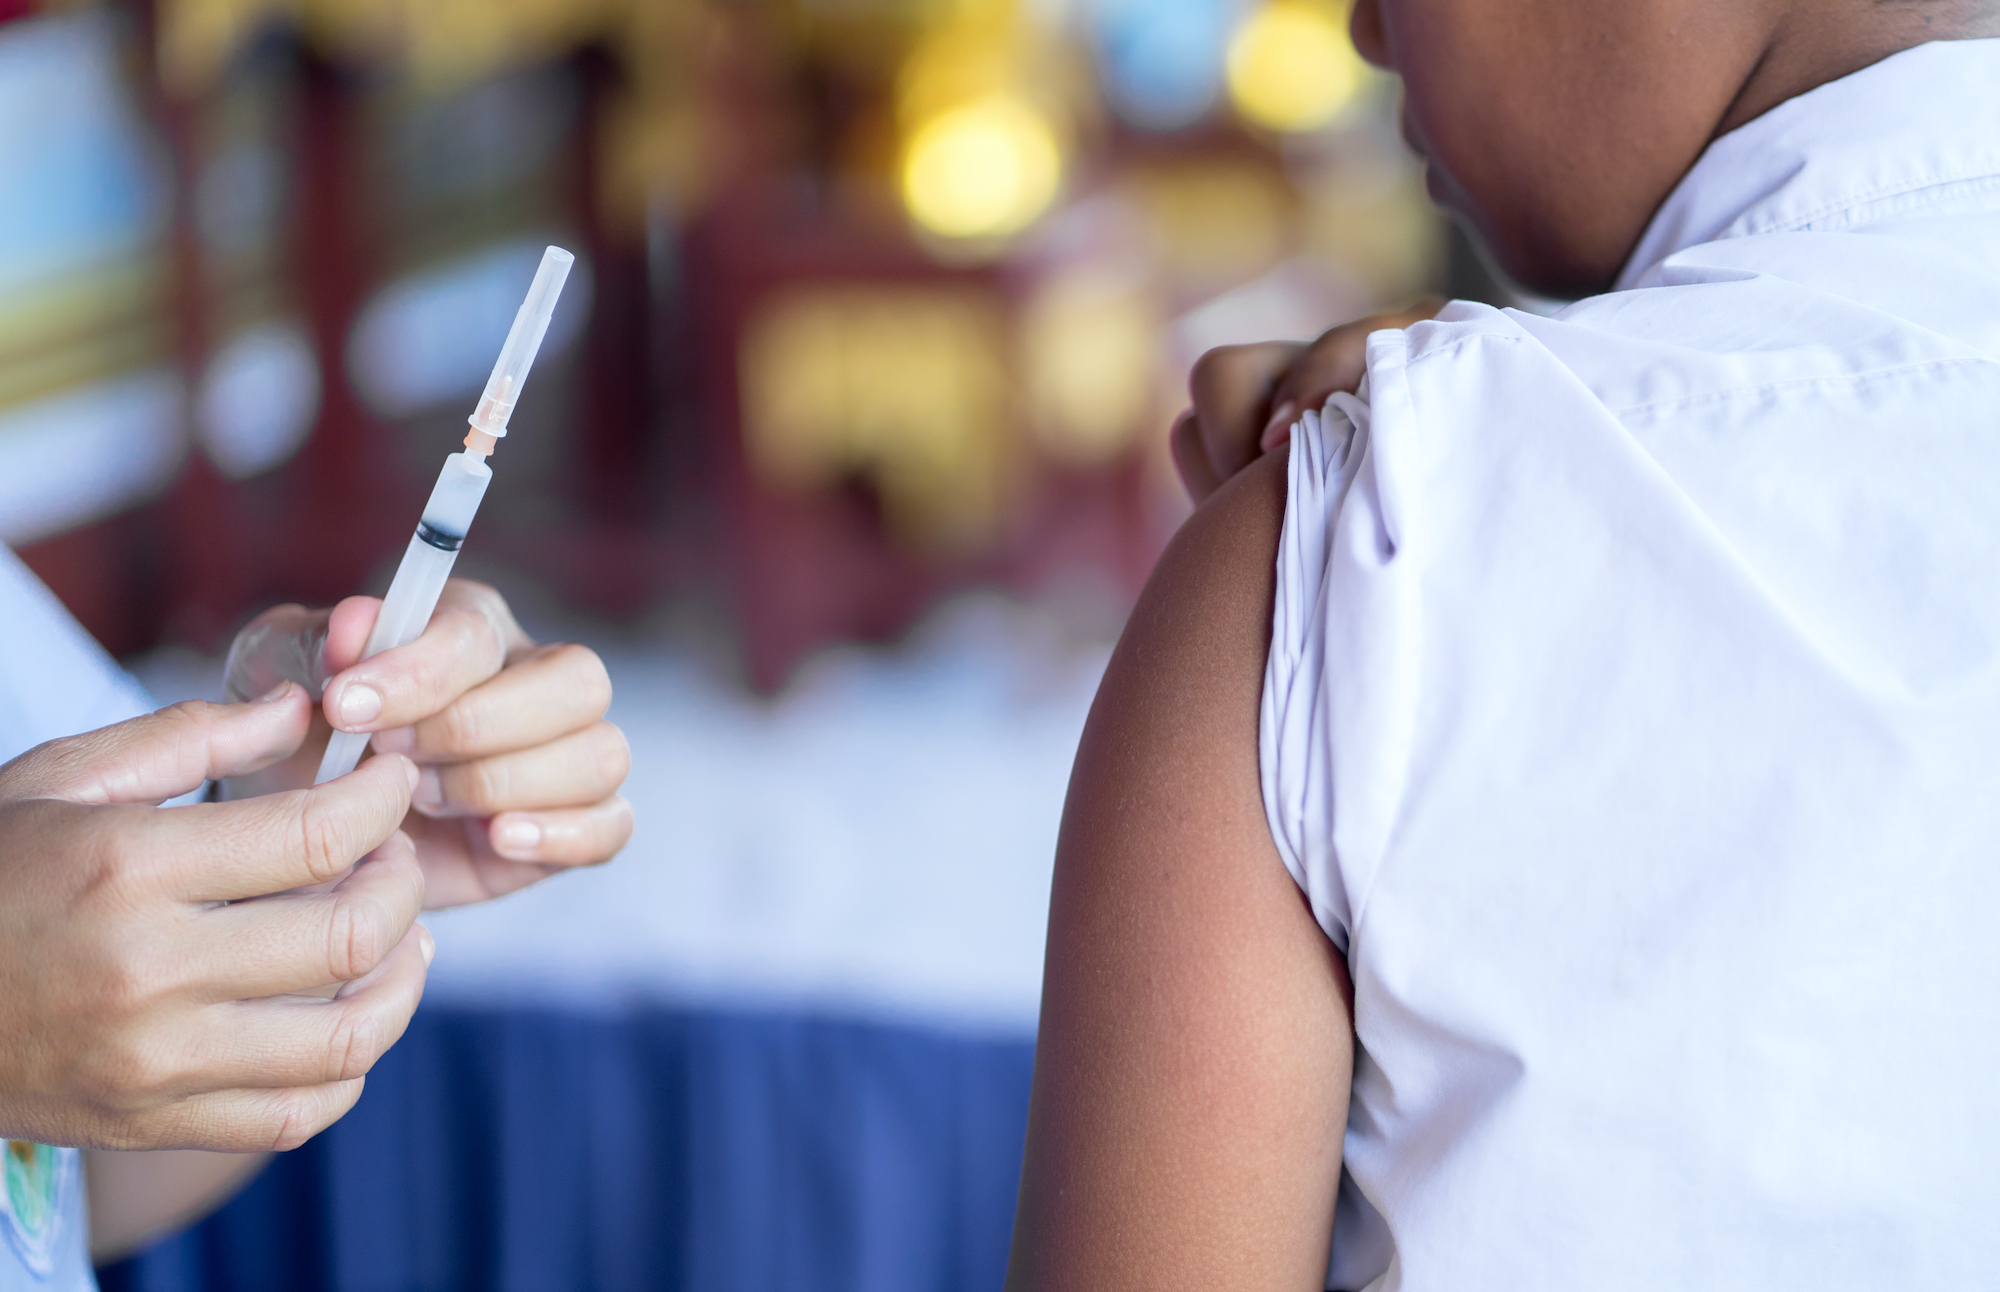 Free flu shots for all Macao residents on offer from today